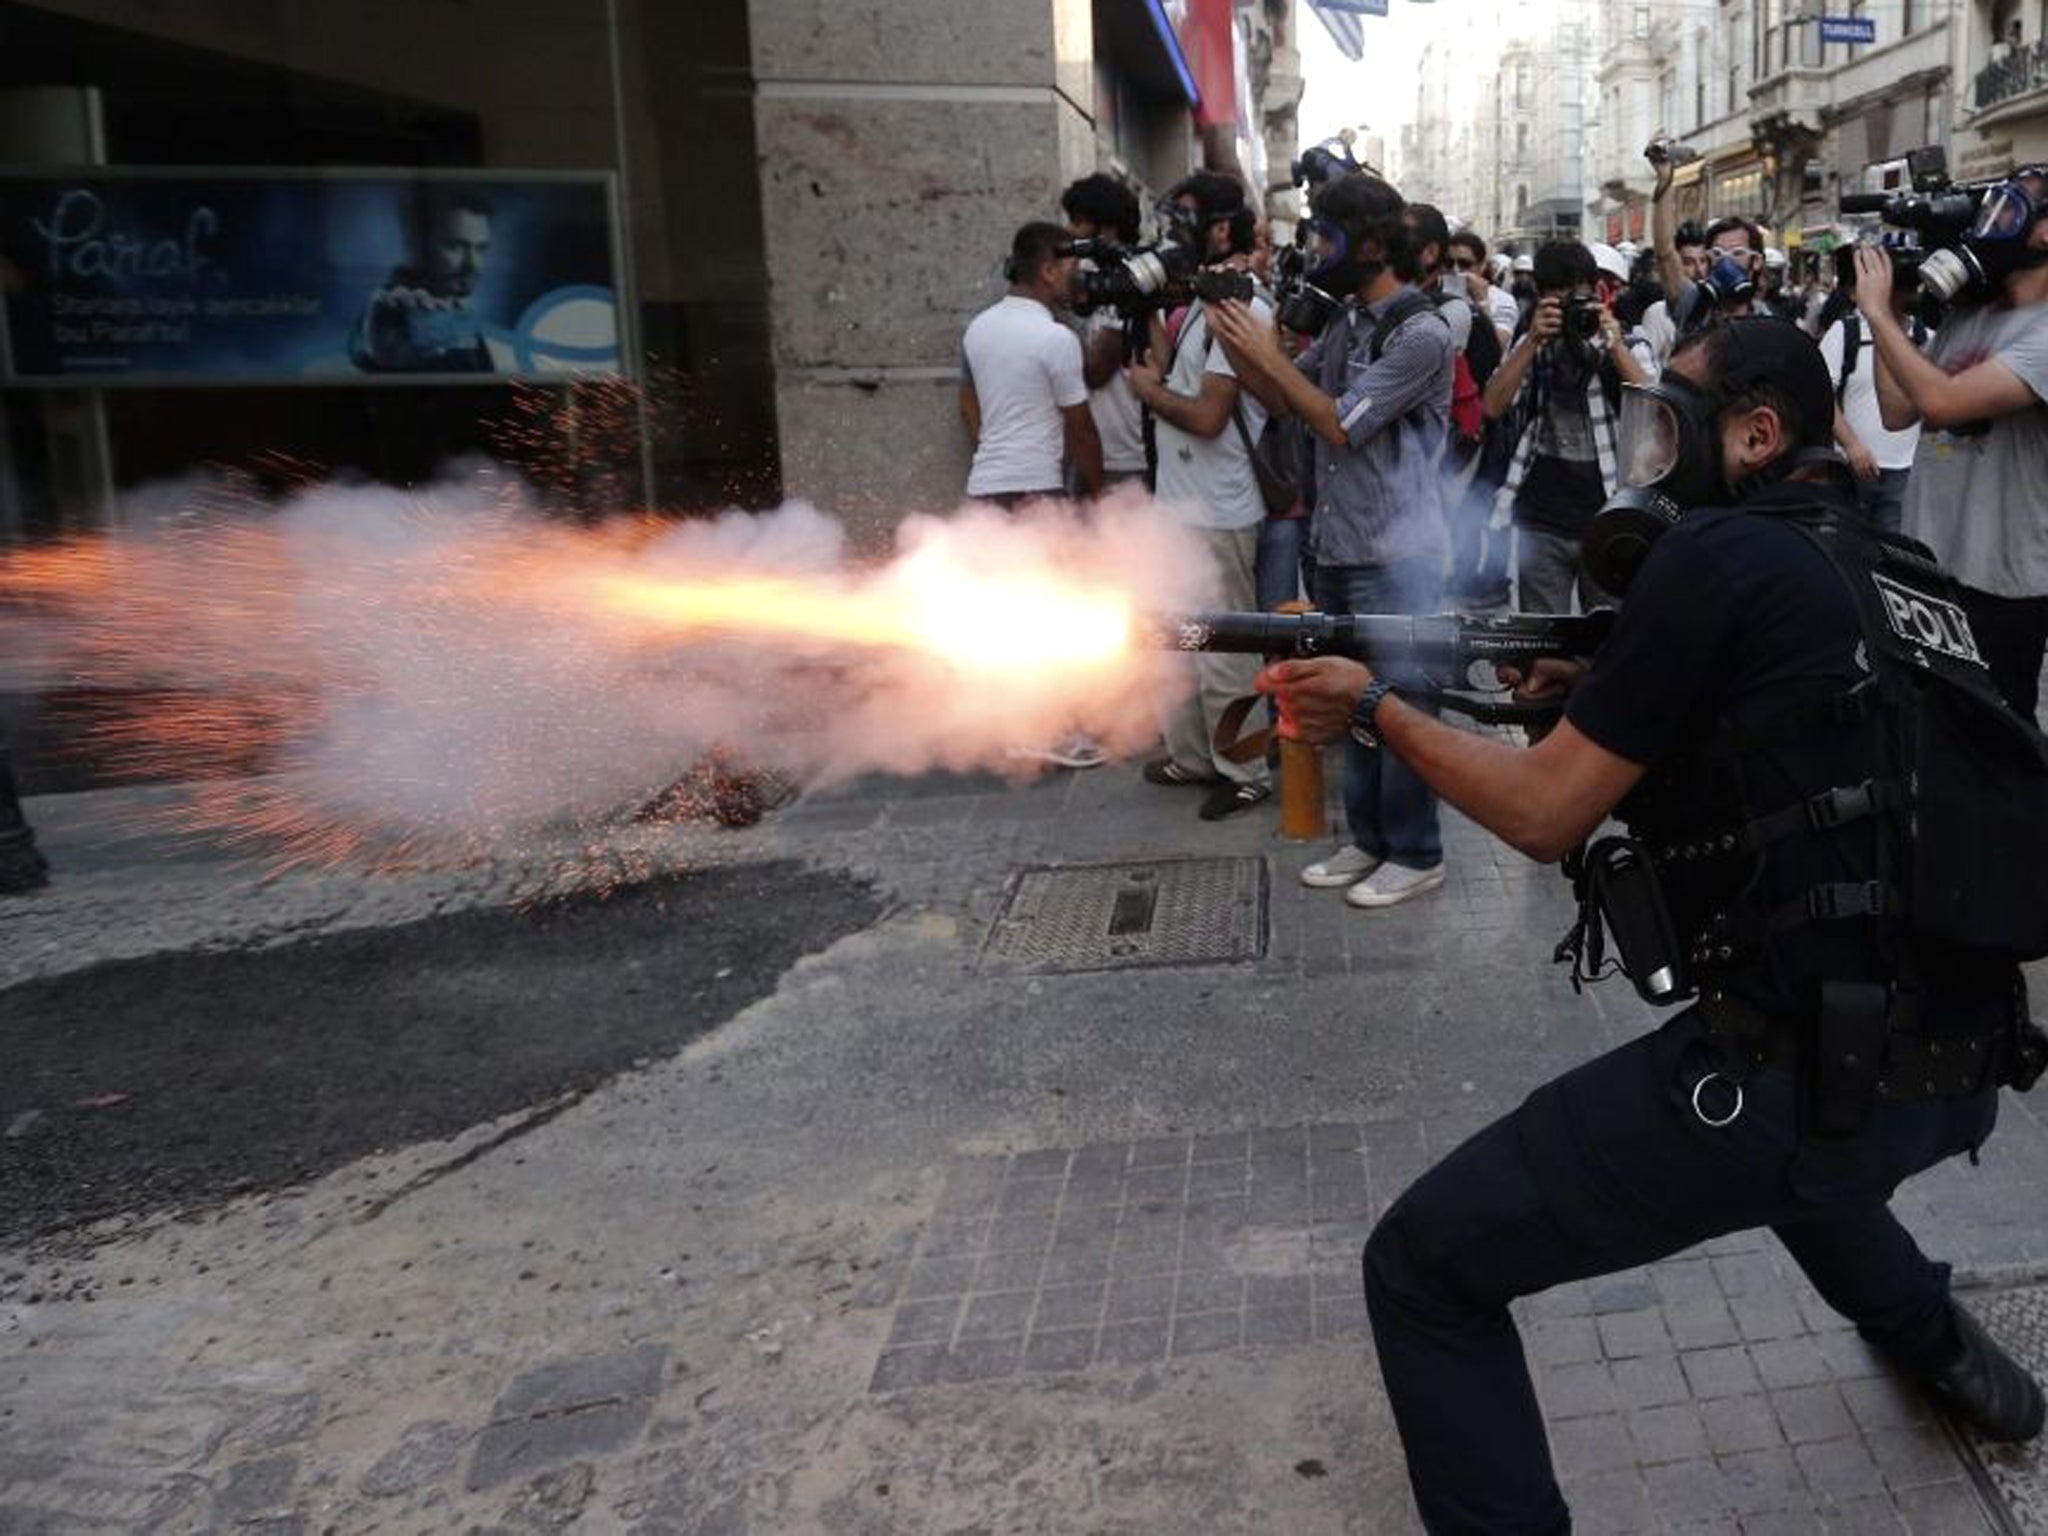 Police fired teargas and water cannons at protesters as they tried to prevent them gathering in Gezi Park